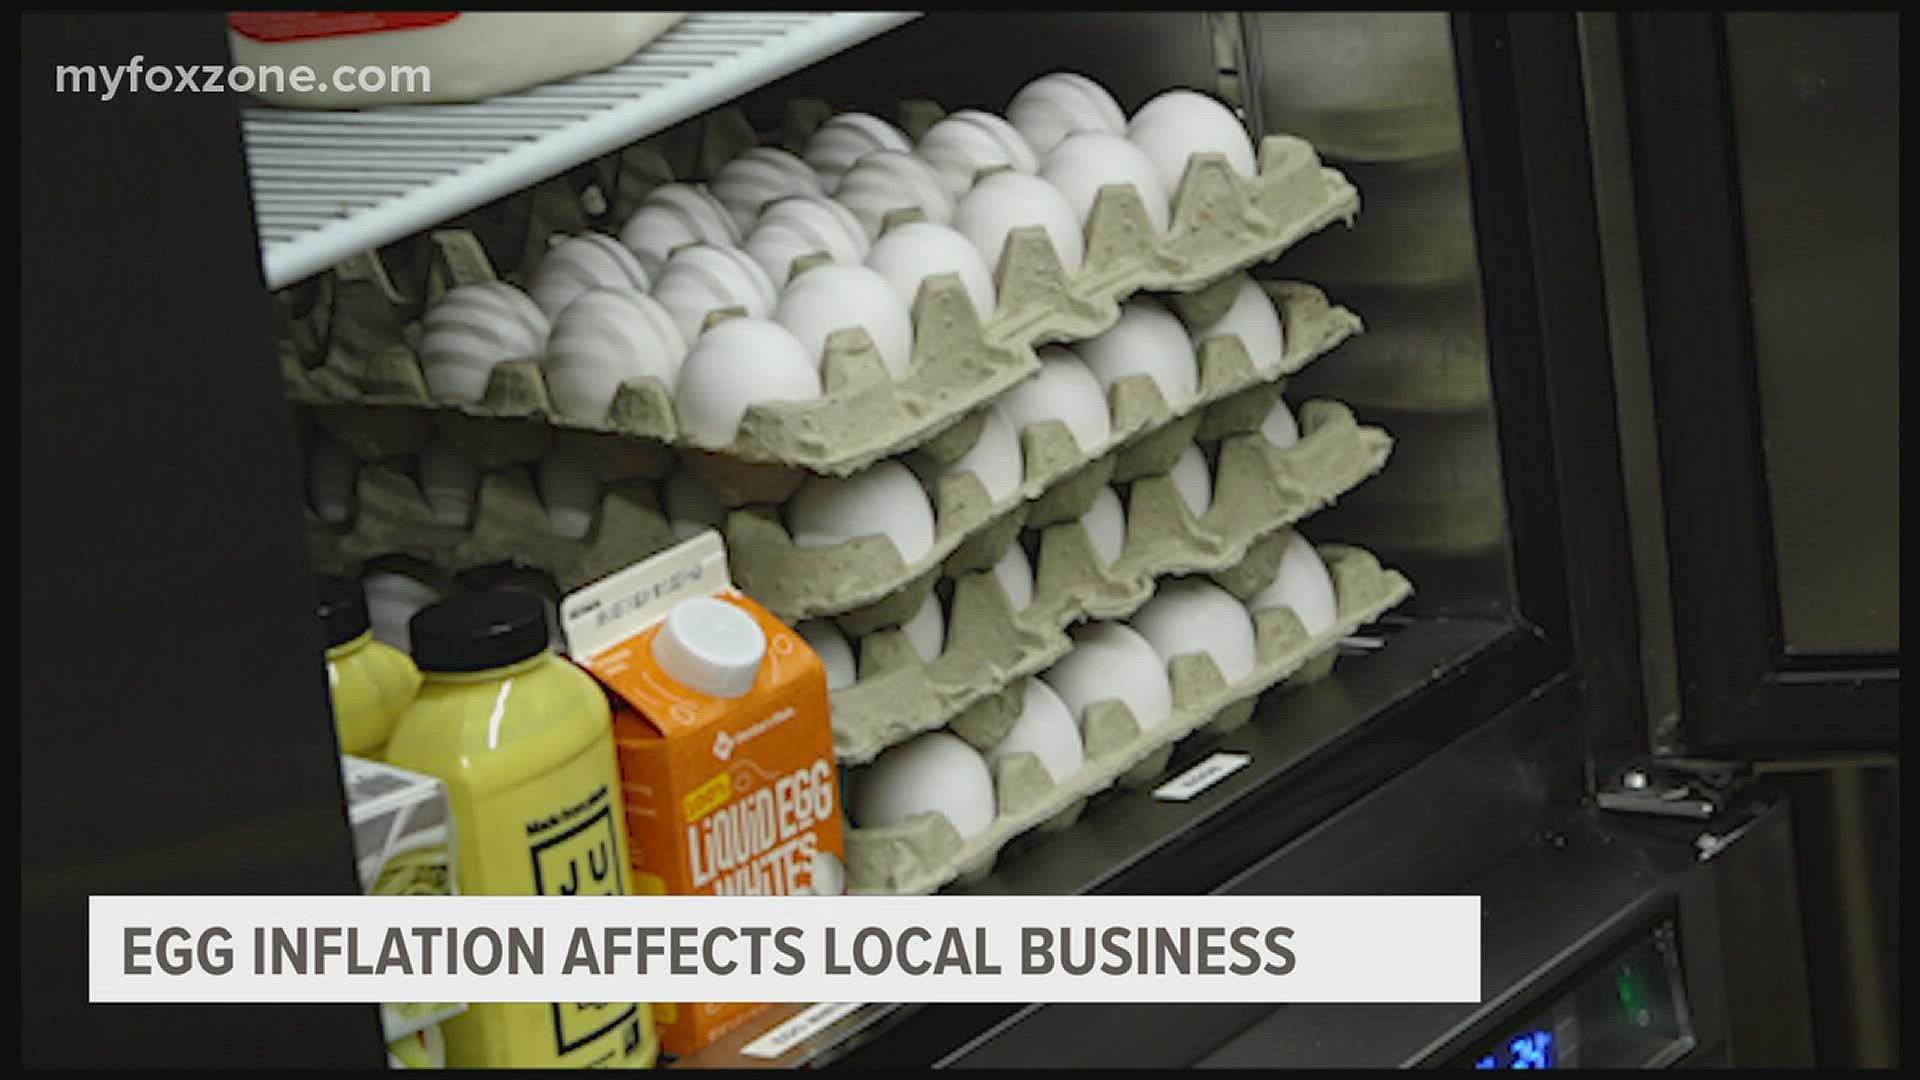 Carter’s Sugar Shop has had to increase its prices because of the rising cost of ingredients.